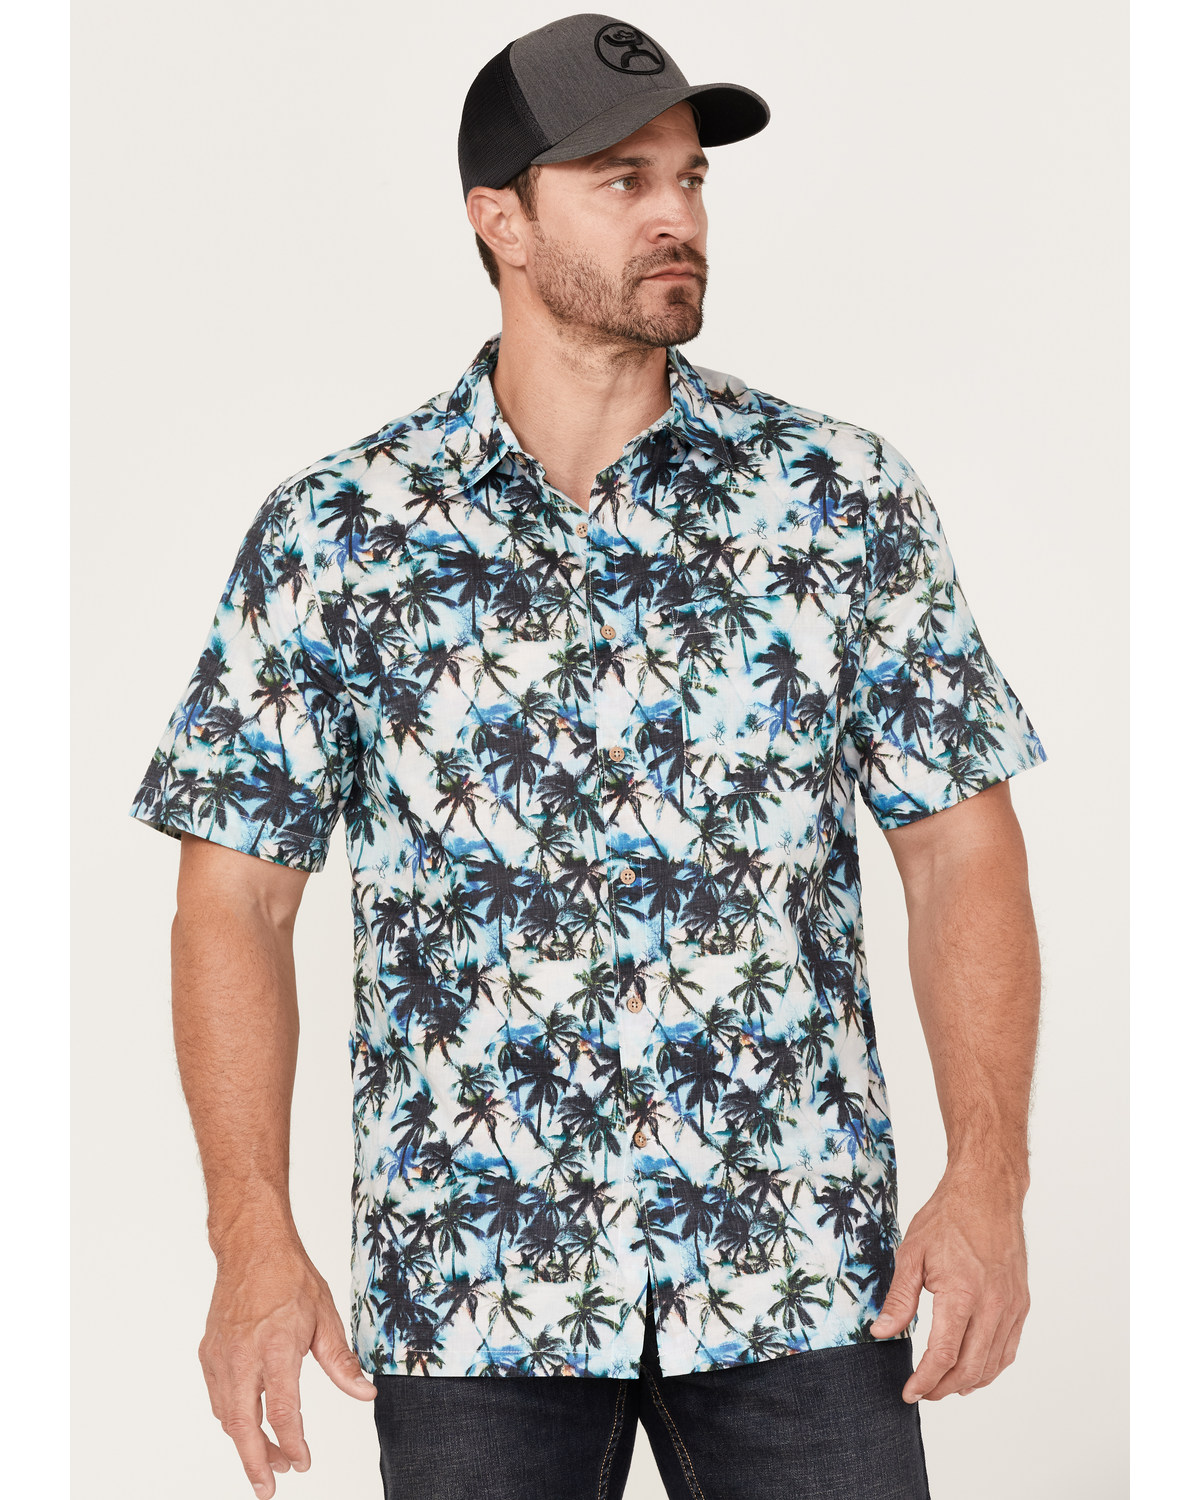 Scully Men's Palm Tree Floral Print Short Sleeve Button Down Western Shirt